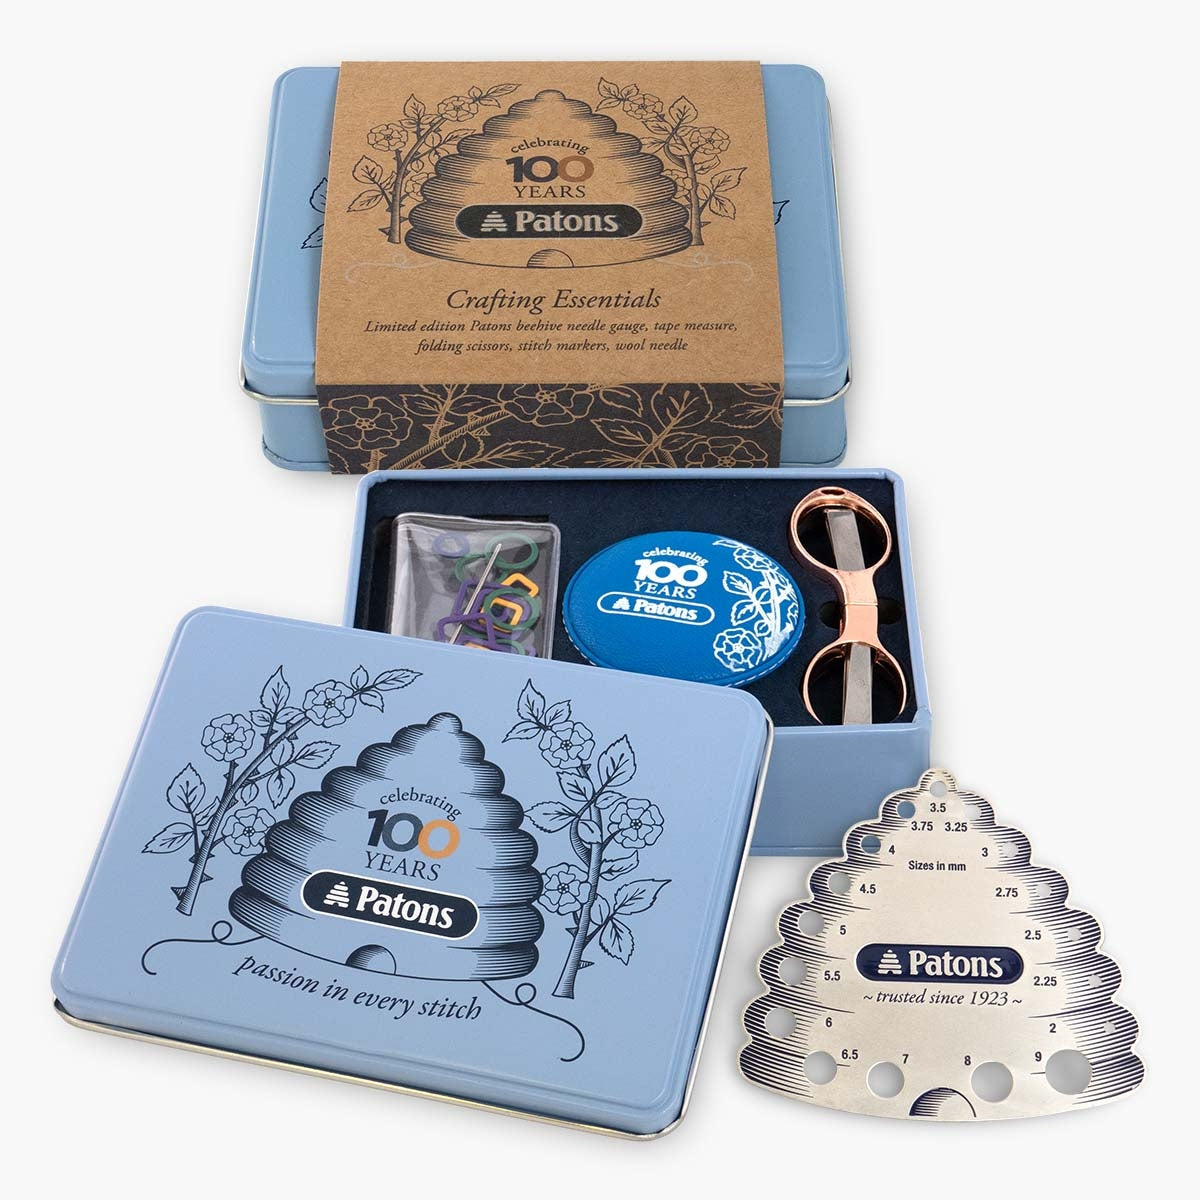 Patons 100 Year Notions Tin - Limited Edition